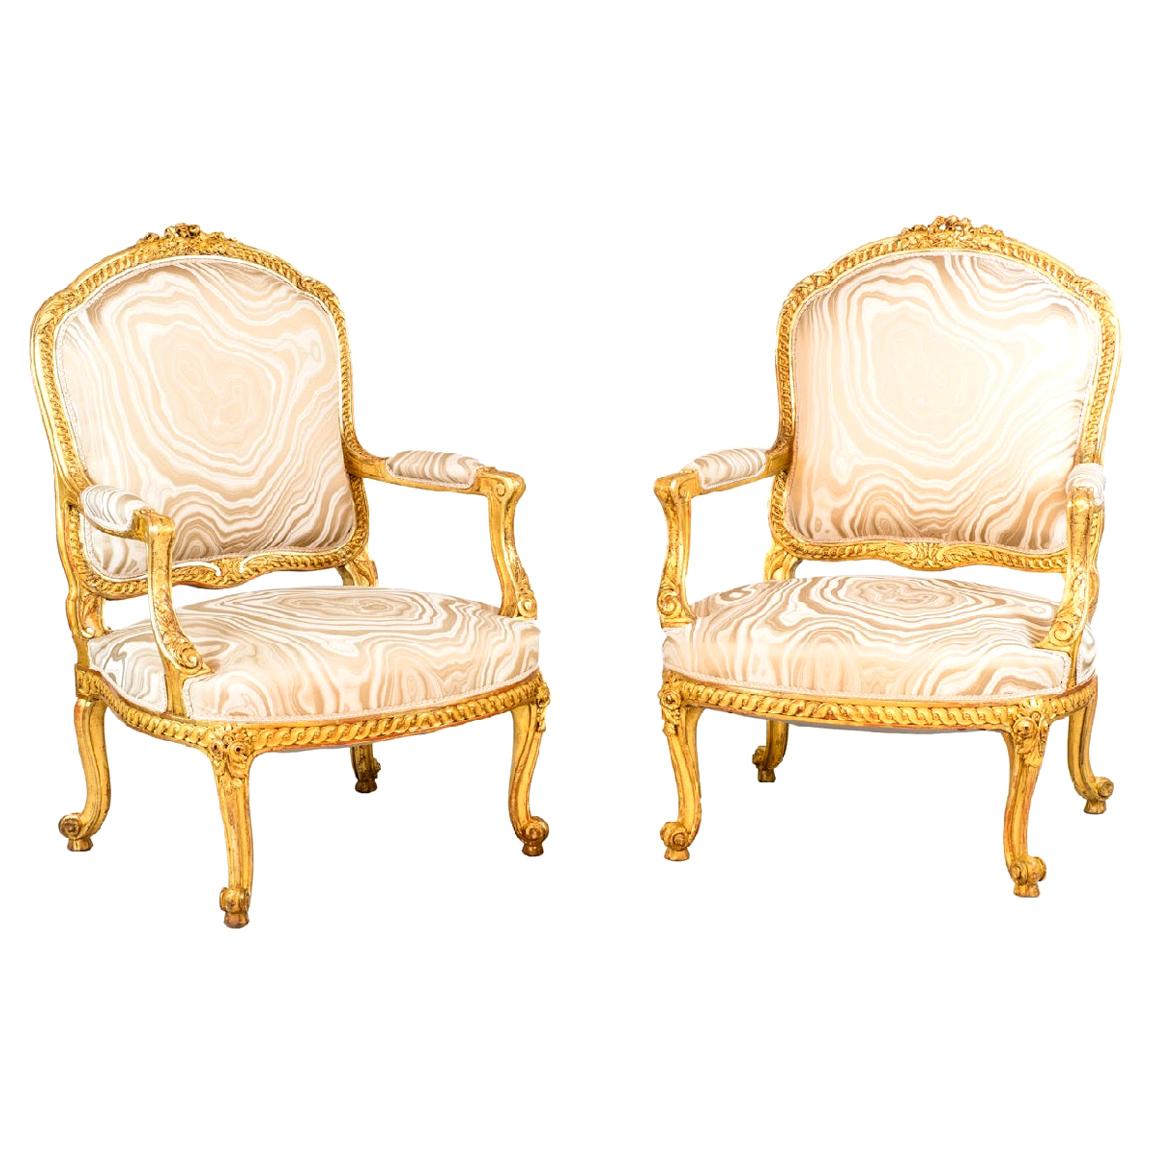 Pair of Transition Style Armchairs in Giltwood, circa 1880